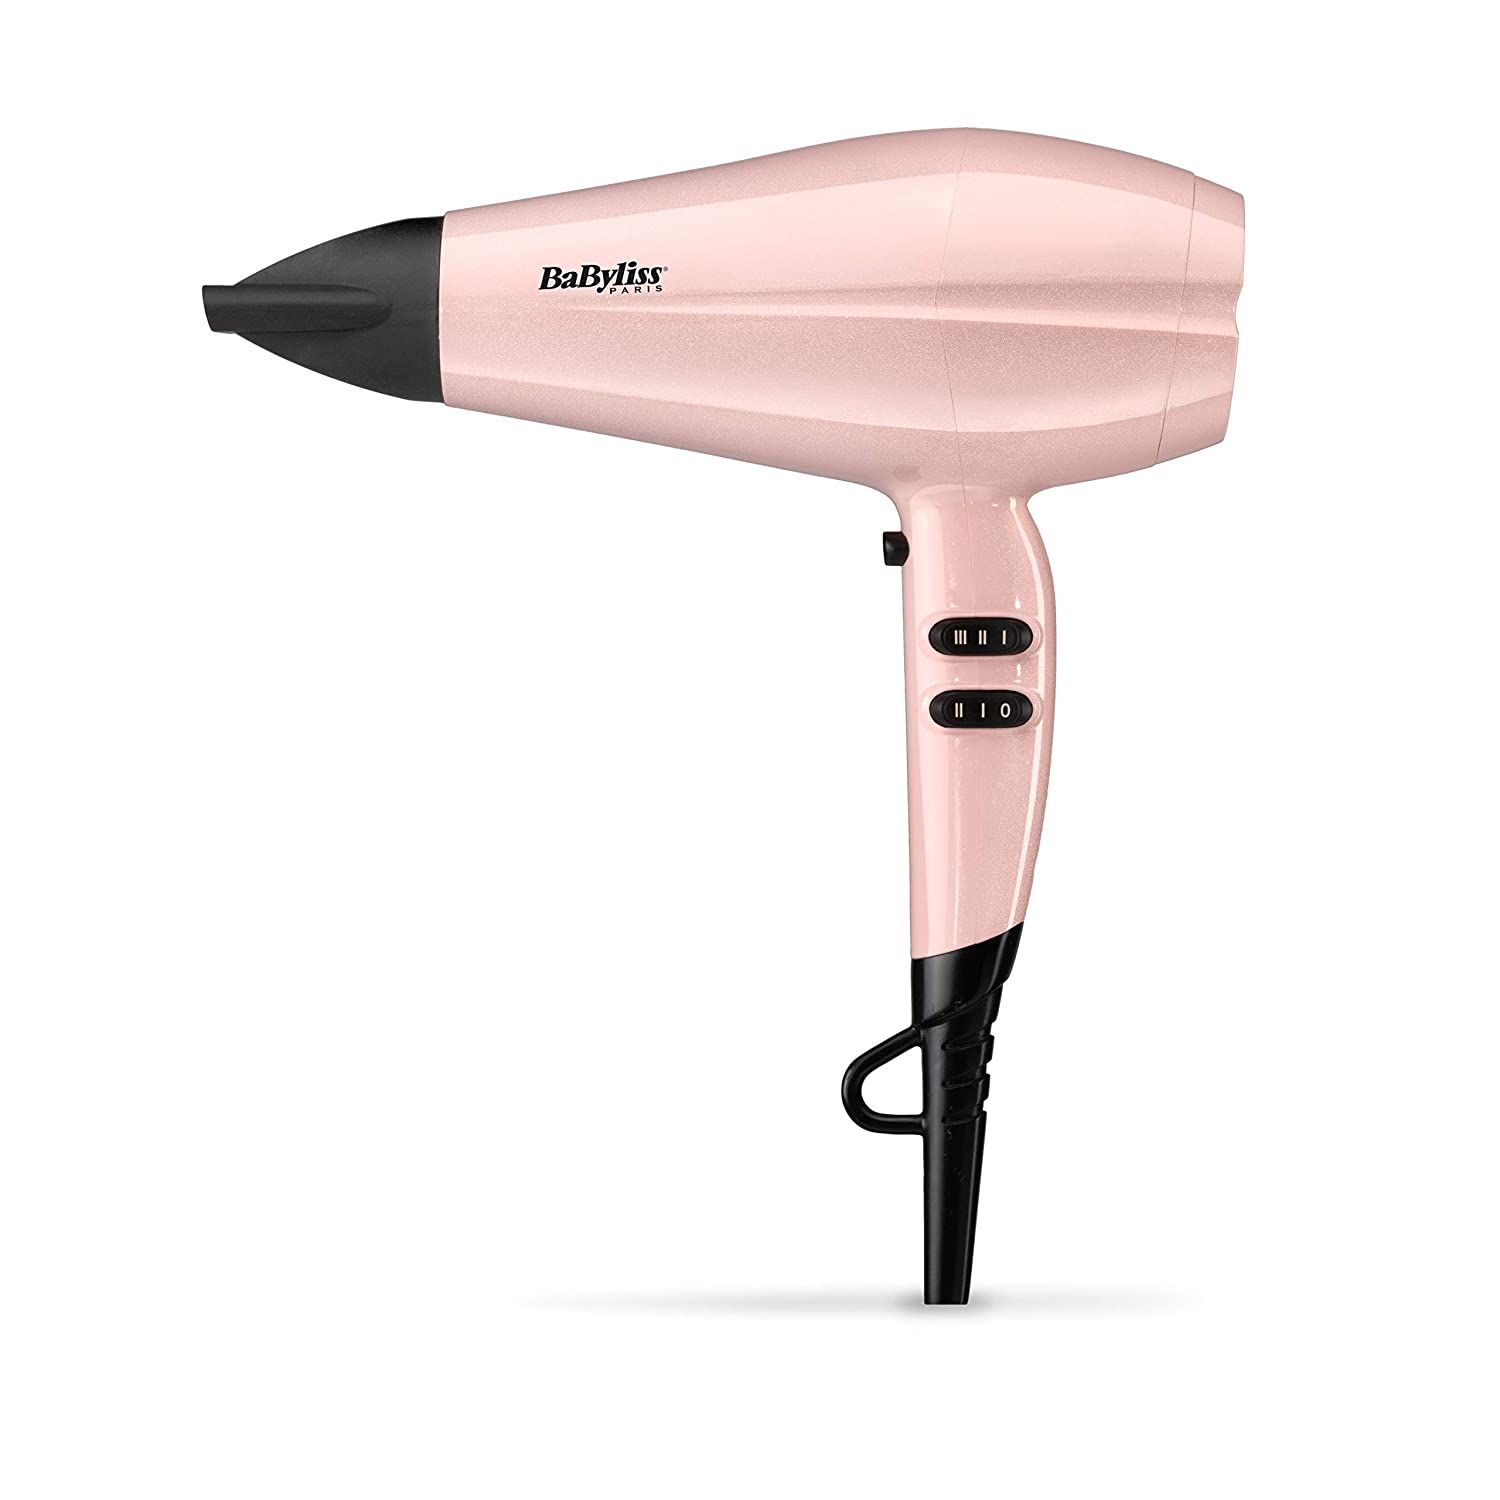 VEGA Insta Glam Foldable 1000 Watts Hair Dryer With 2 Heat  Speed  Settings VHDH20 Pink Made In India  VEGA Adore Hair Straightener with  Ceramic Coated Plates  Quick HeatUp VHSH18